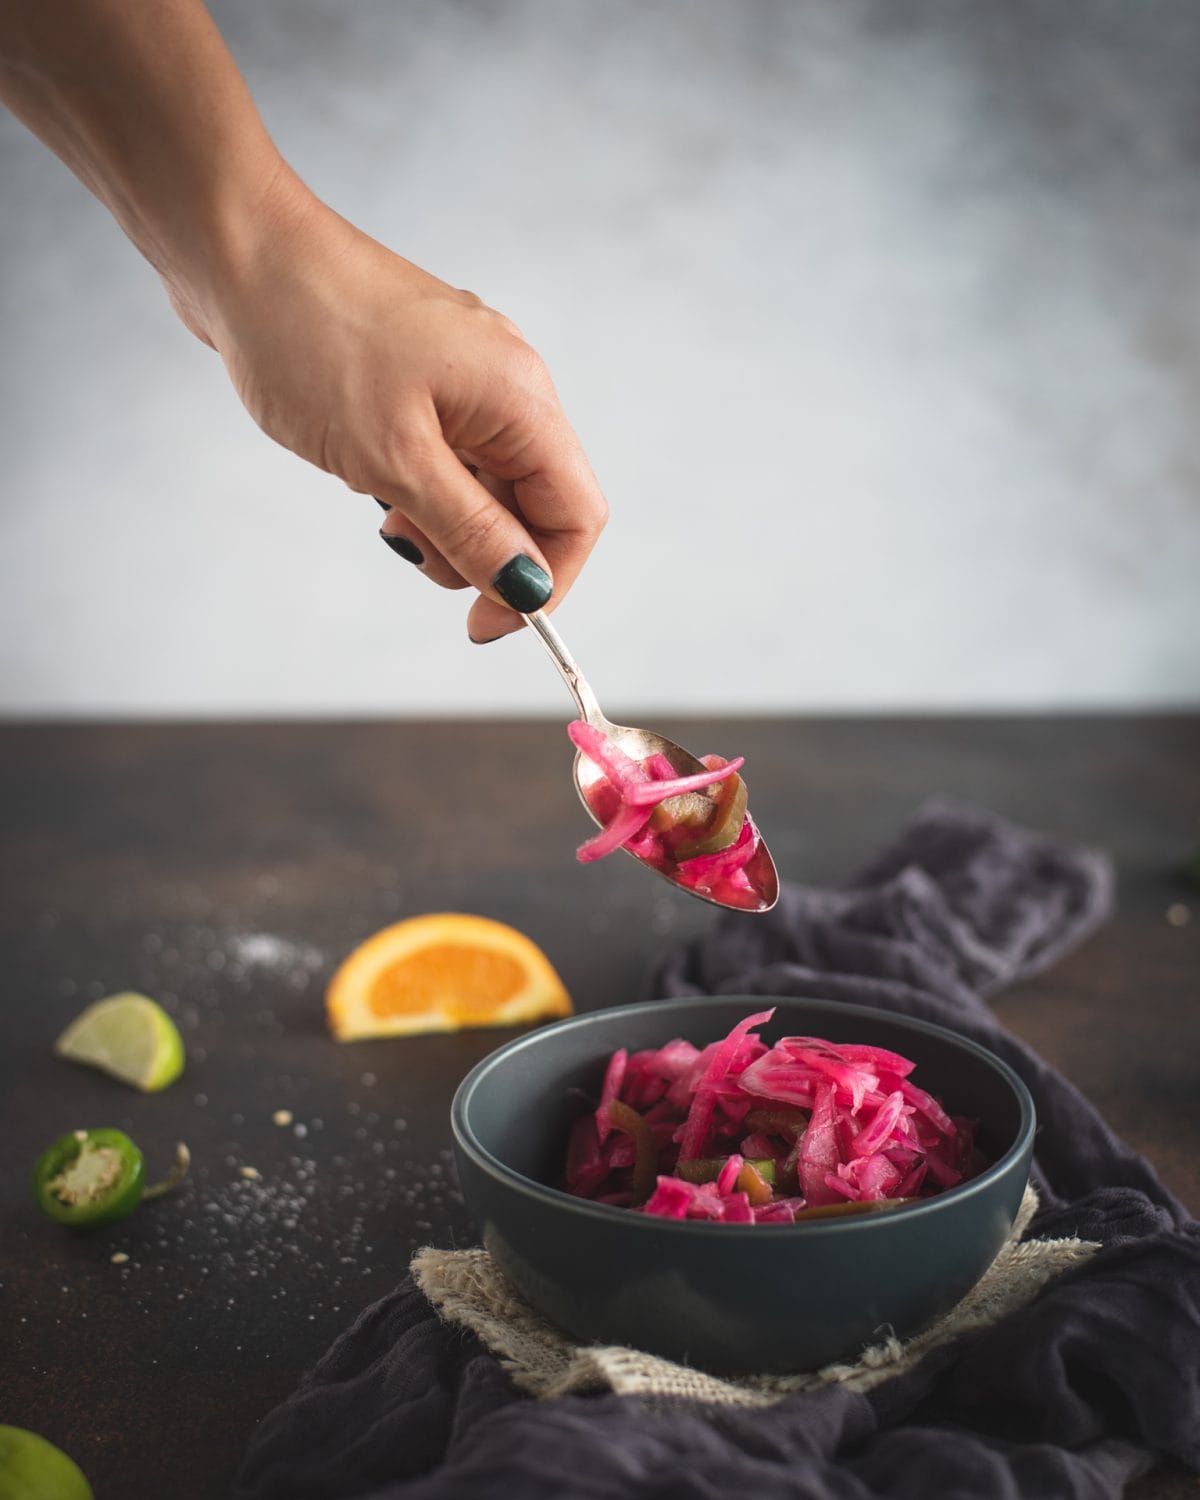 Hand with spoon scooping pickled red onions from bowl